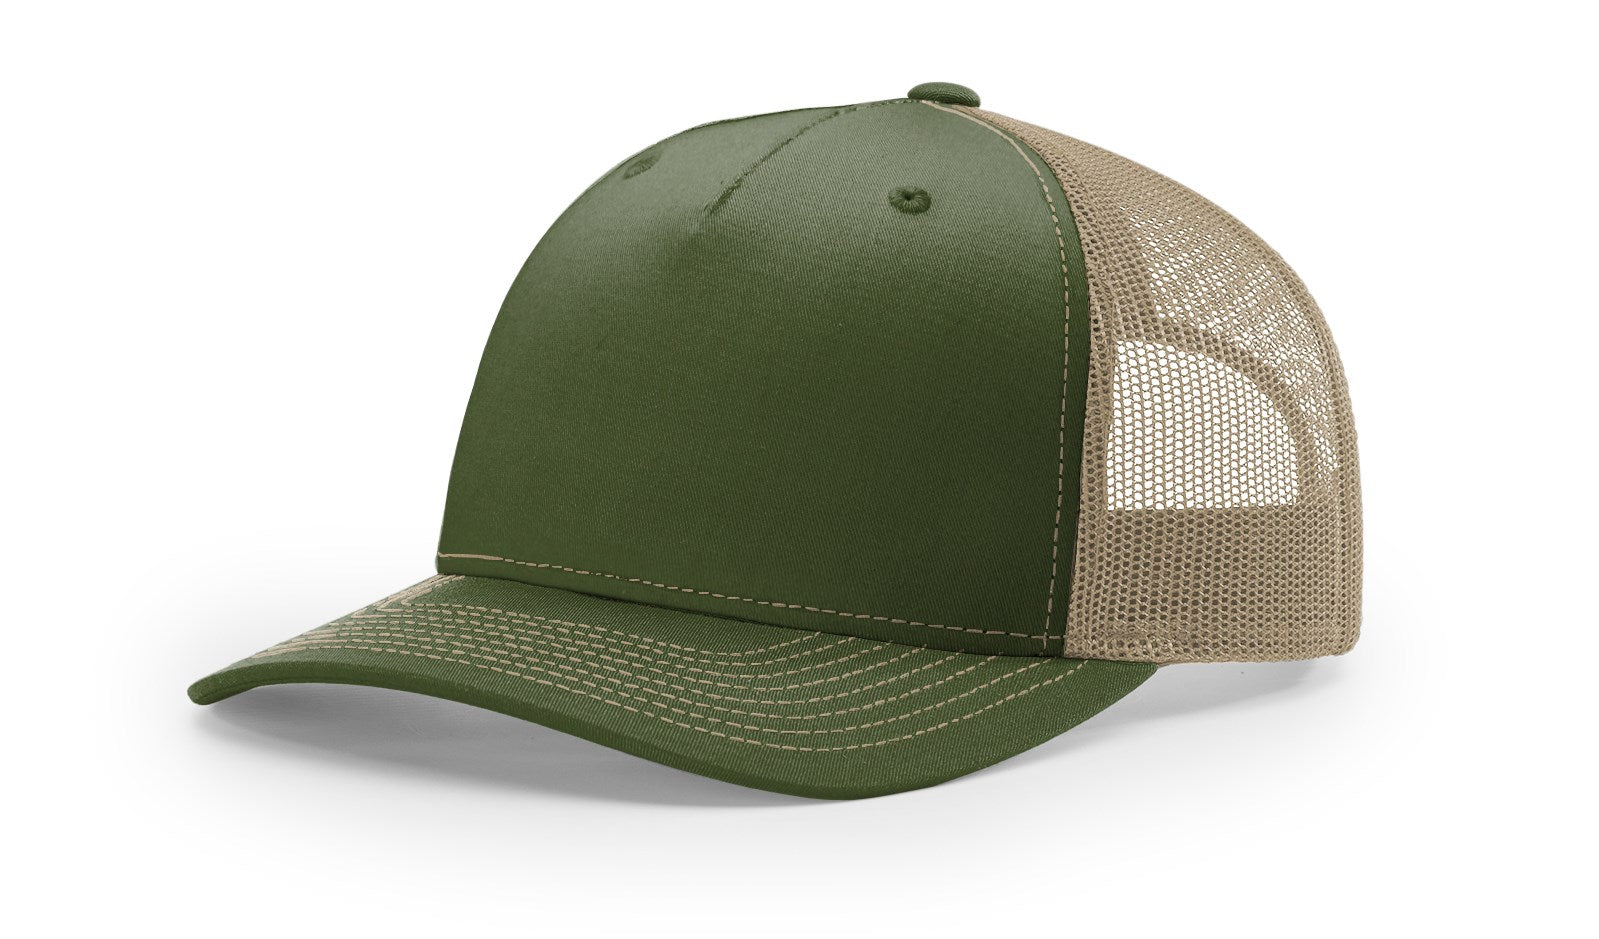 Army Olive/Tan color variant